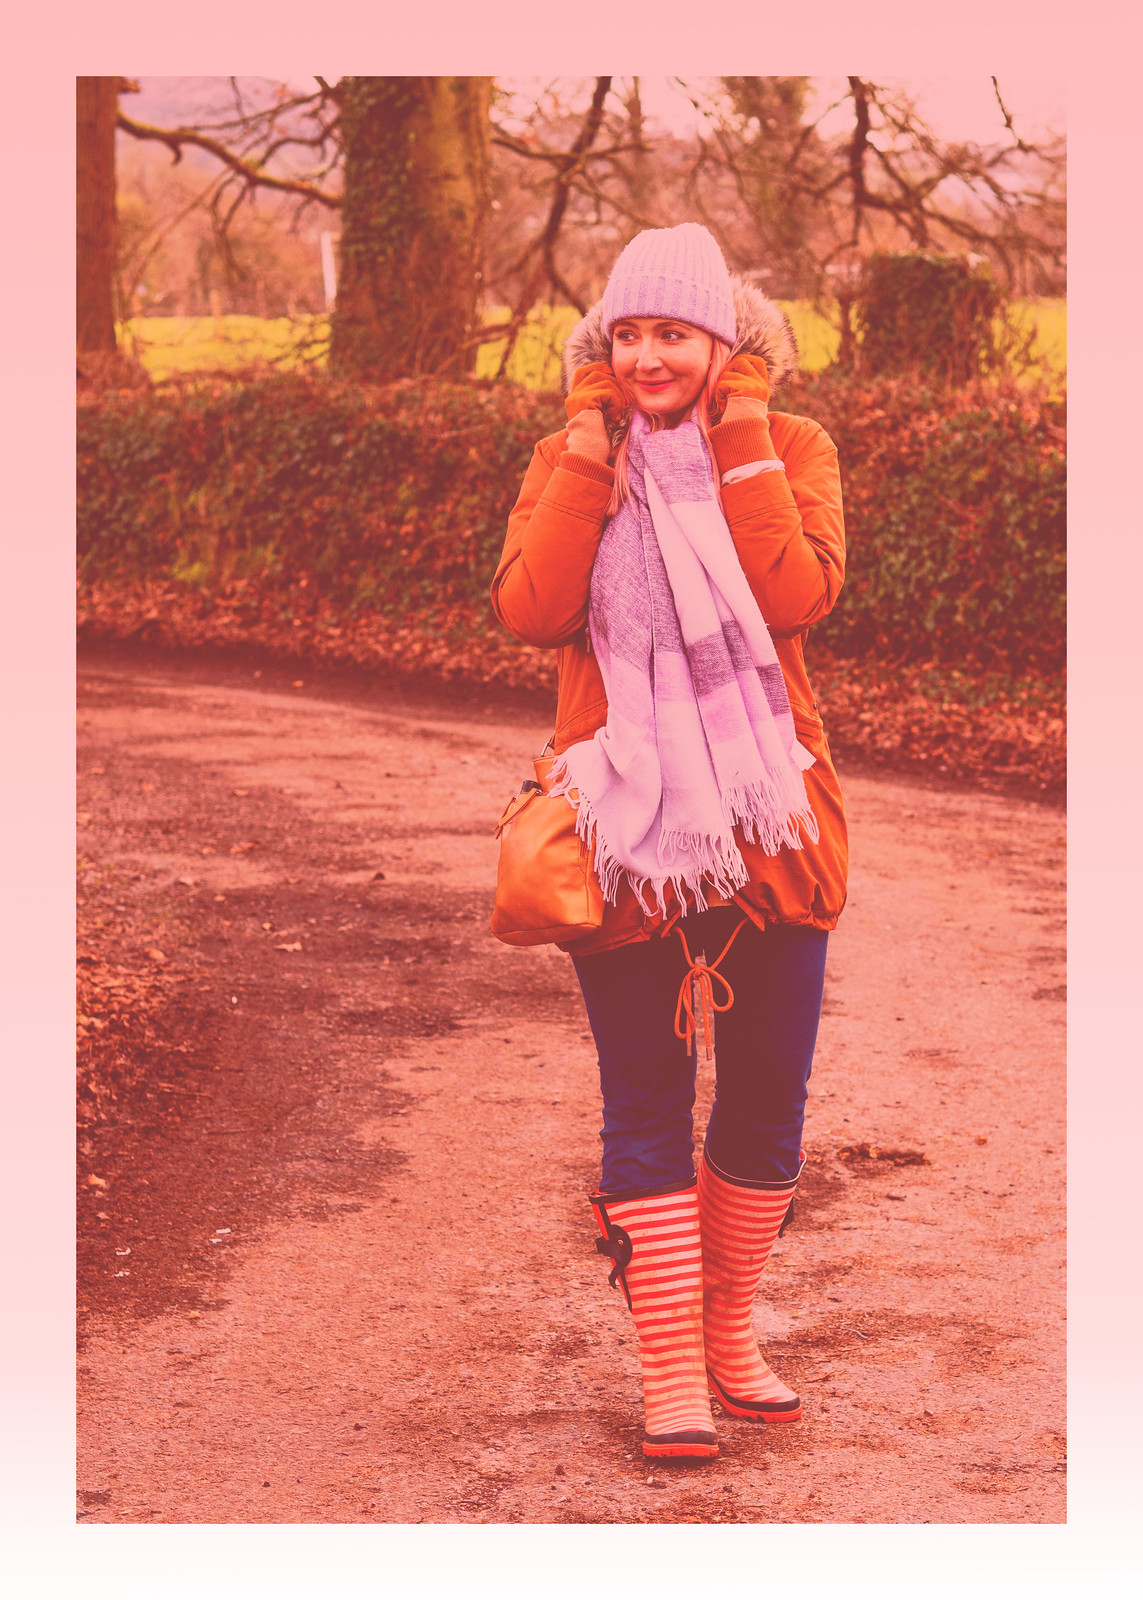 The Importance of Bright Accessories in Cold Weather | Catherine Summers of Not Dressed As Lamb, Over 40 Fashion, wearing burnt orange parka, lilac beanie and scarf and blue jeans tucked into red striped wellies